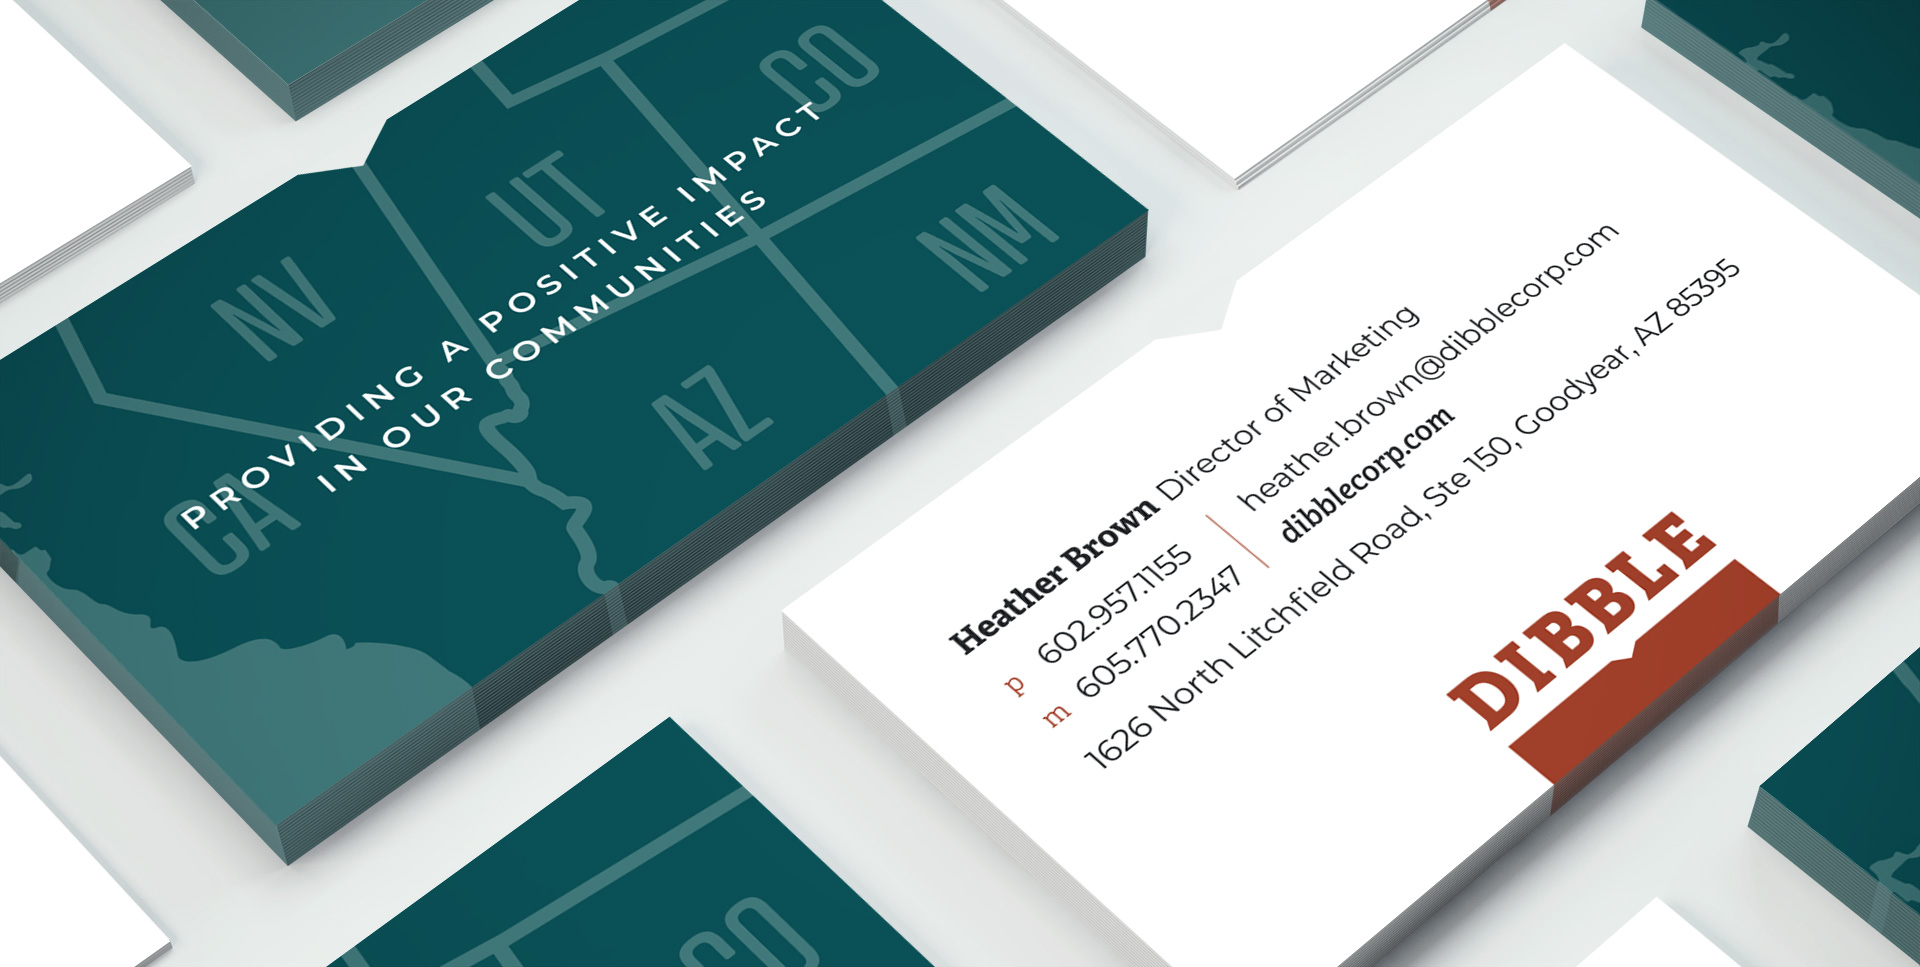 Dibble business cards designed by LecoursDesign